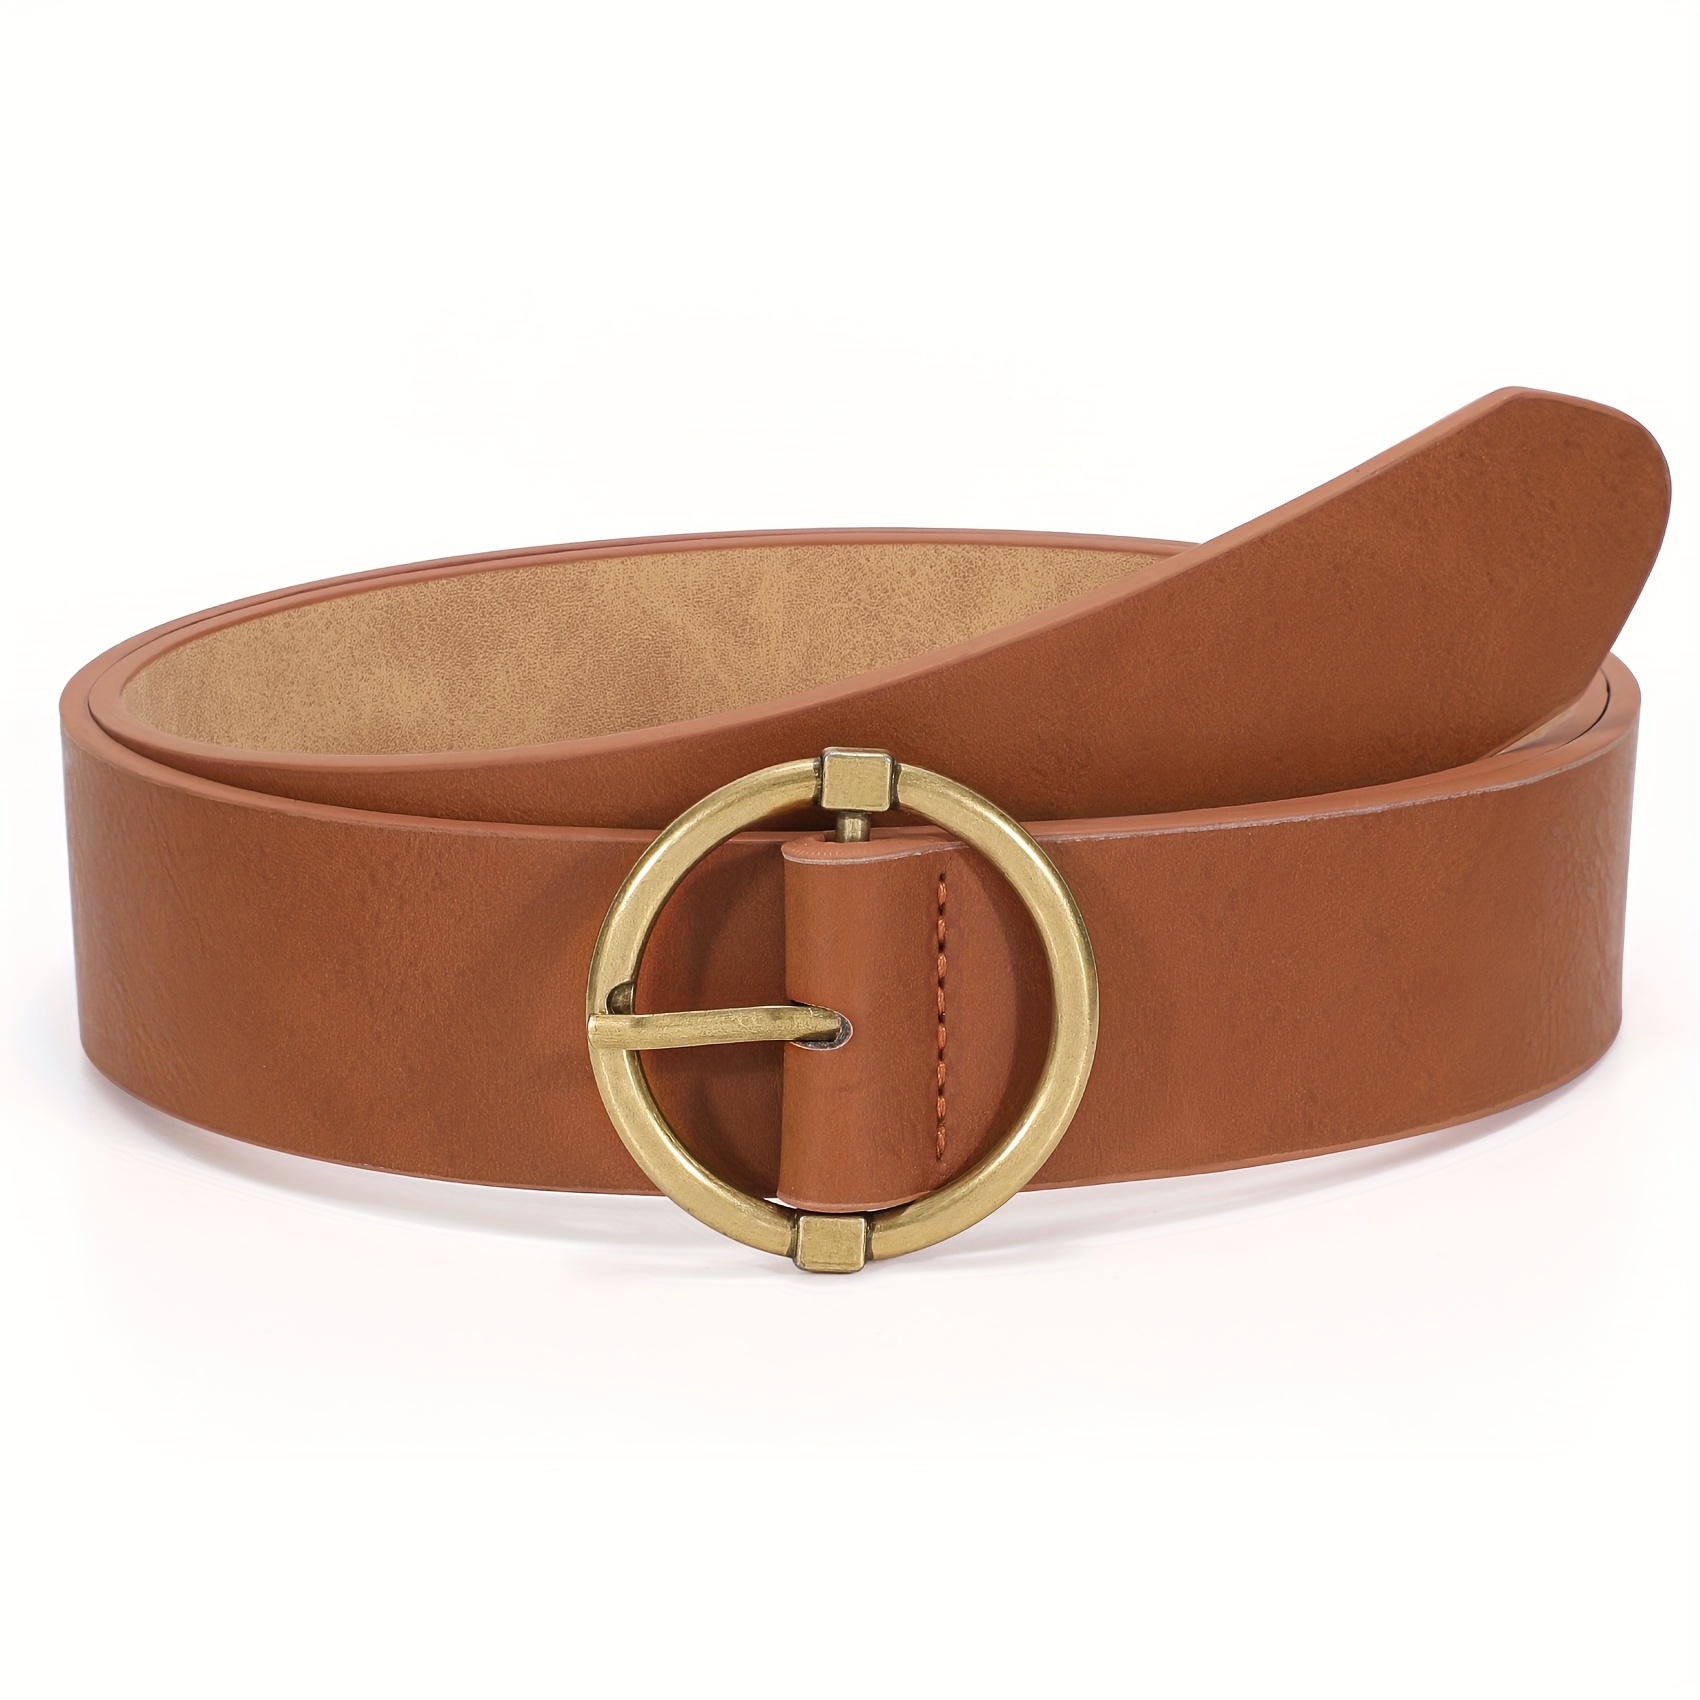 Girls women PU leather belt with round buckle waistband without